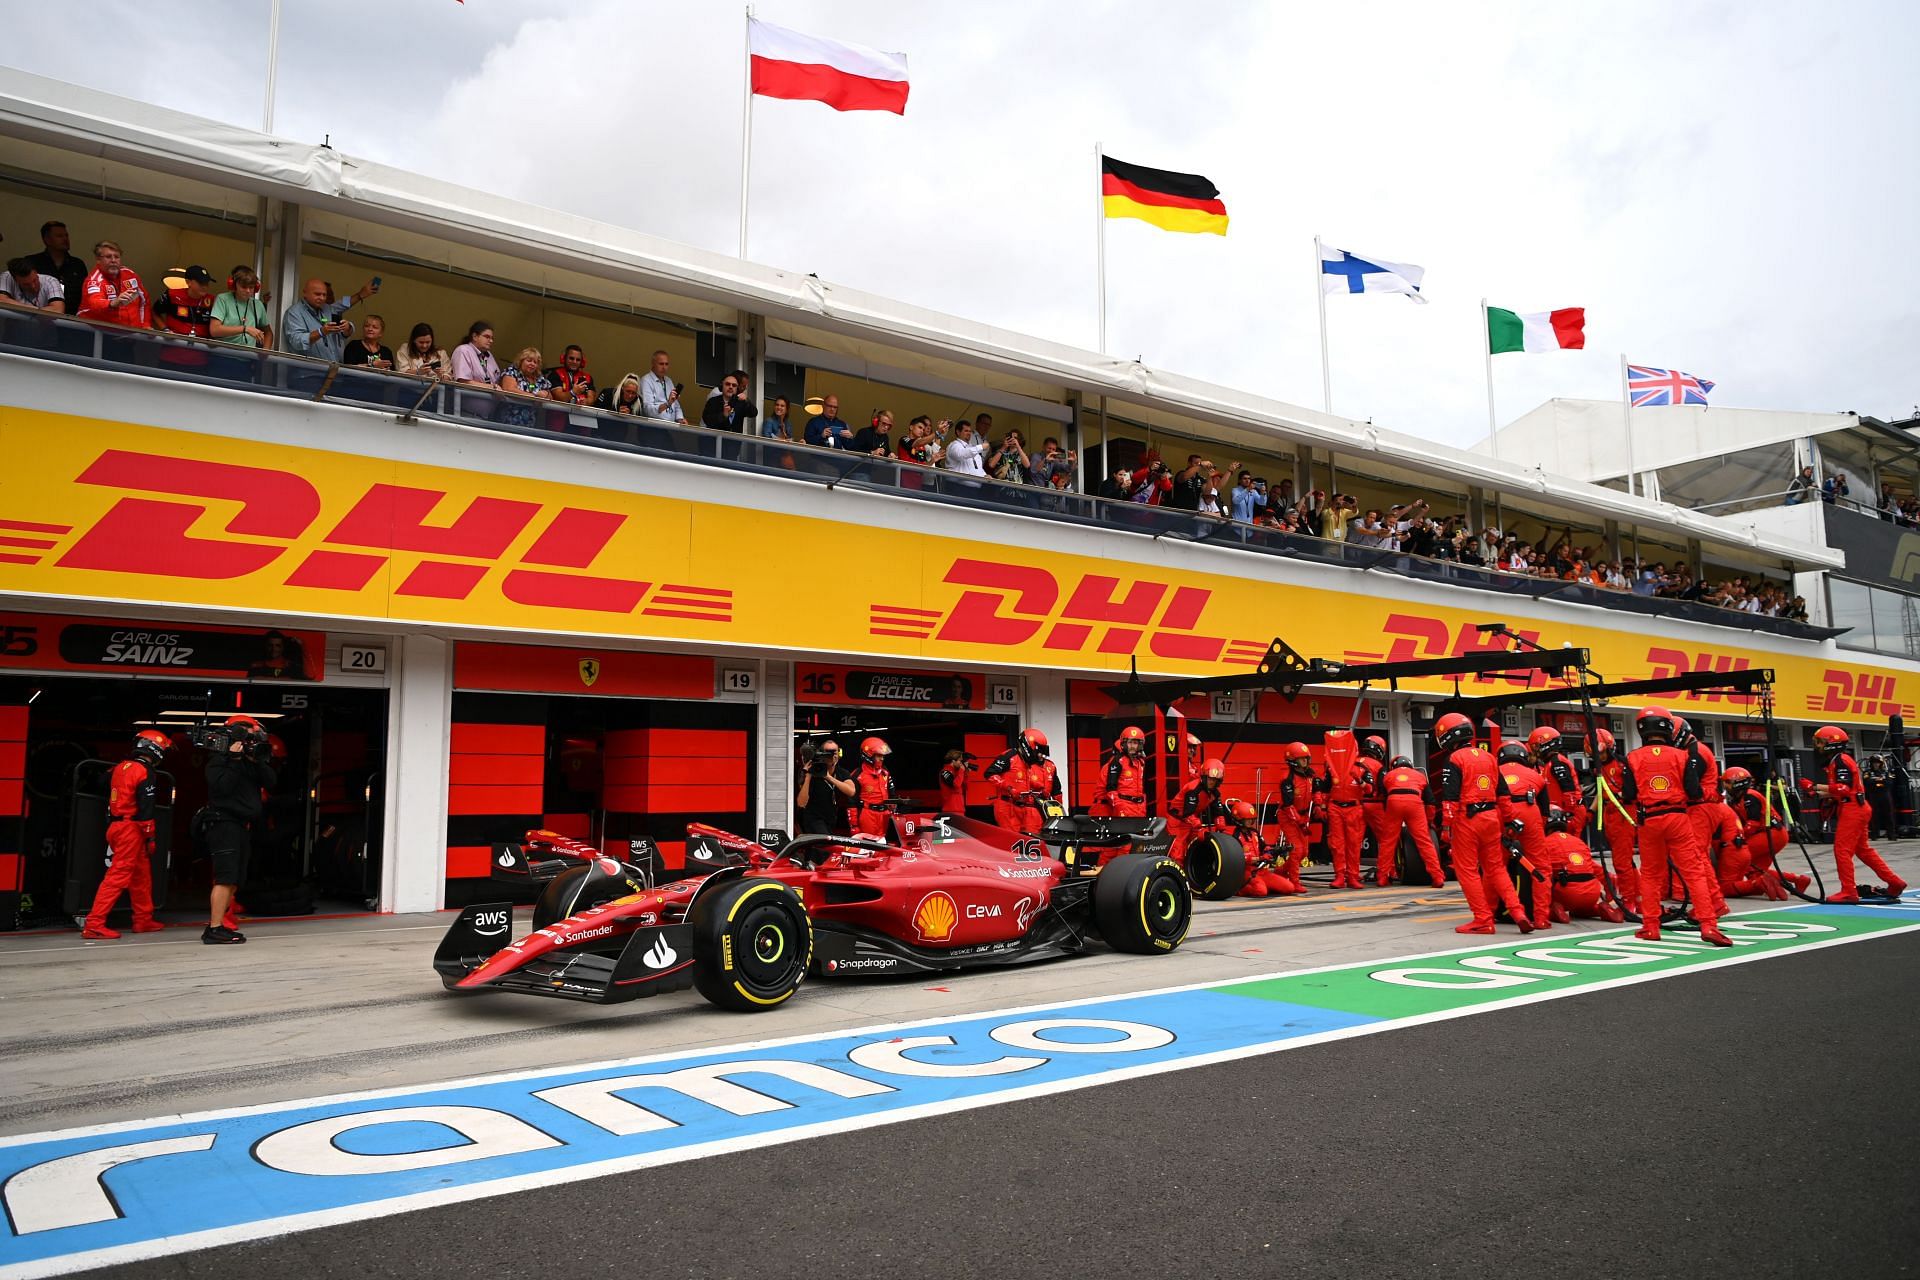 The Scuderia is under immense pressure after repeated failures within the team